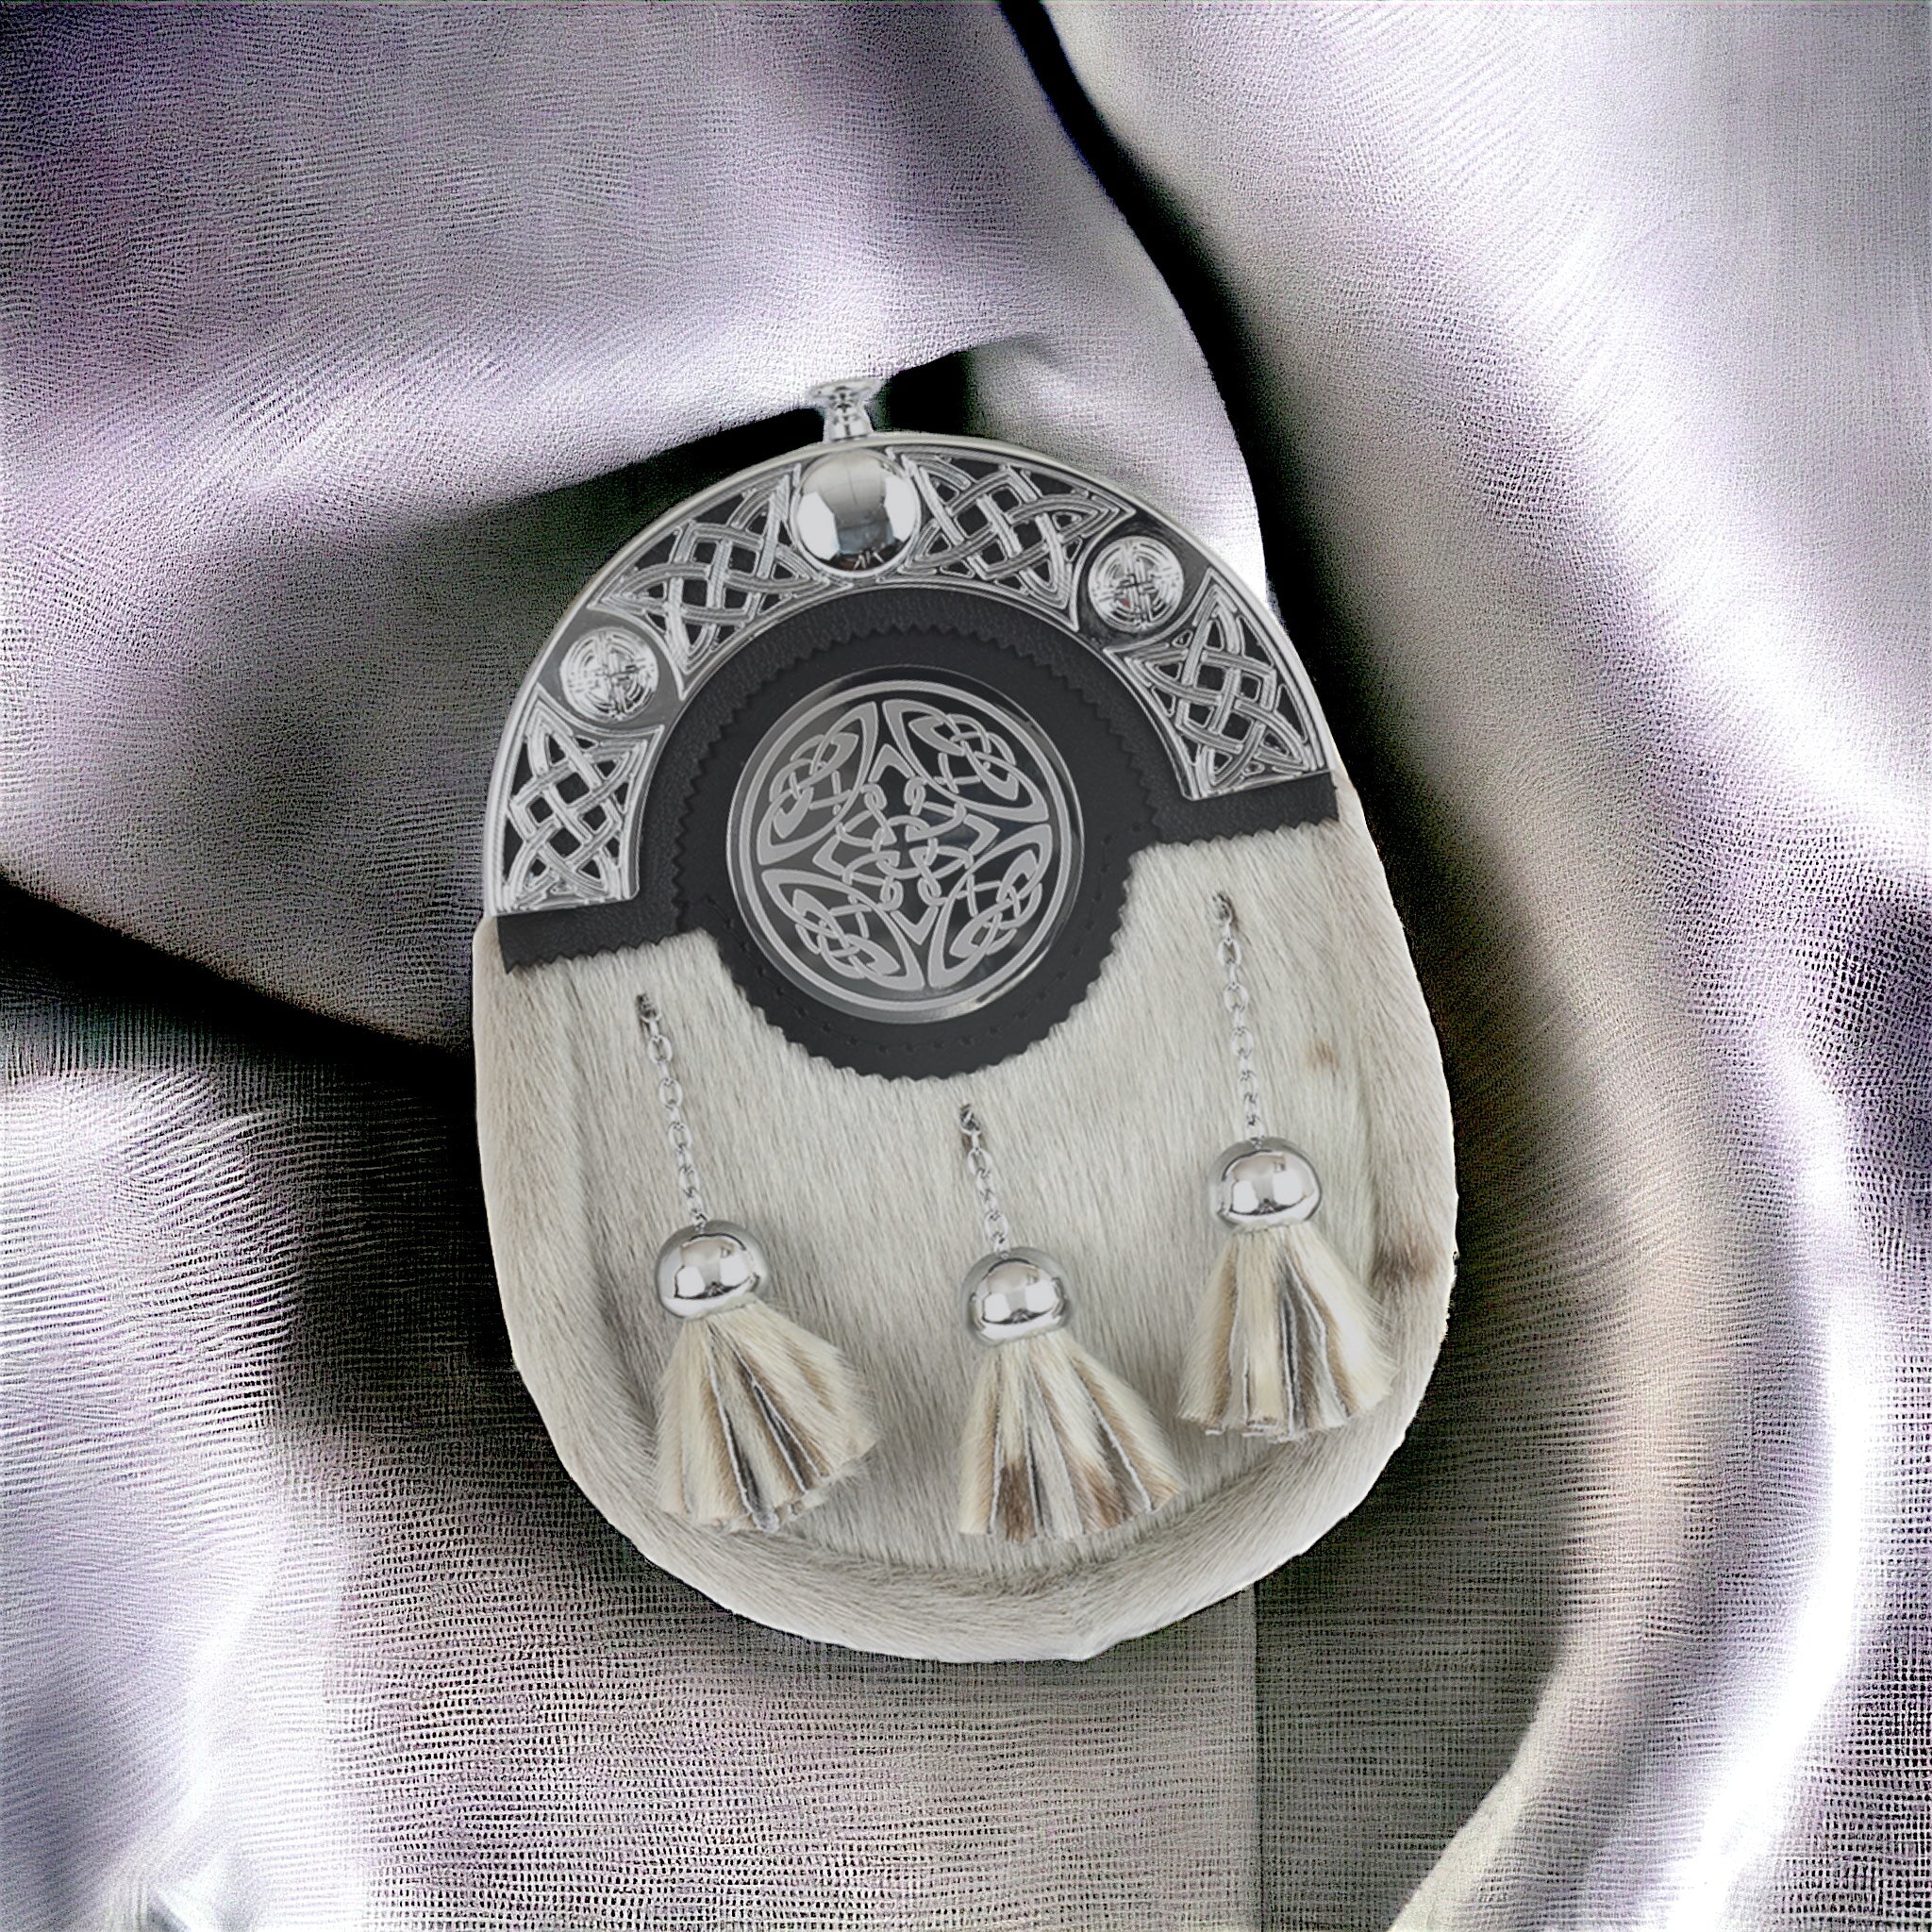 Dress sporran in seal skin with celtic engraved badge in center.